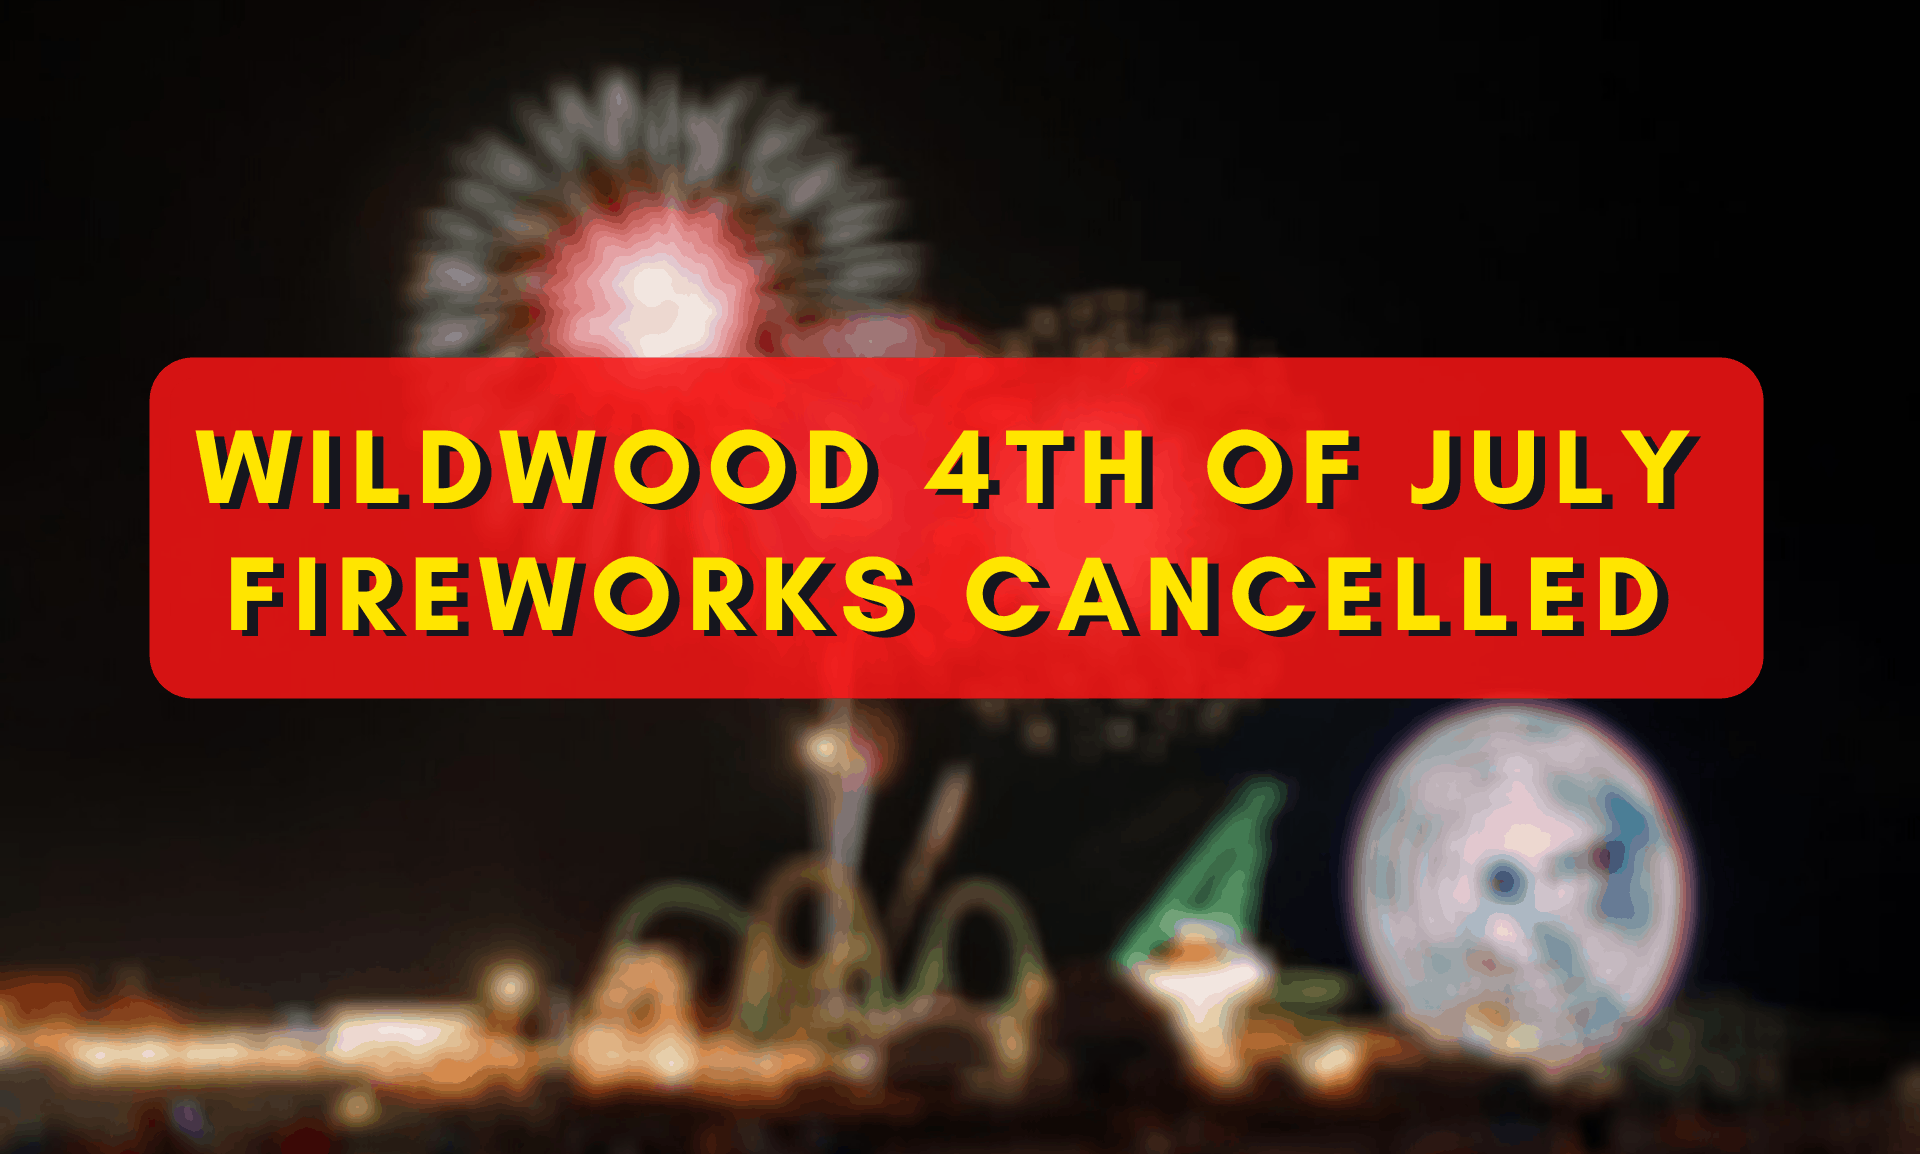 Wildwood 4th of July Fireworks Cancelled!